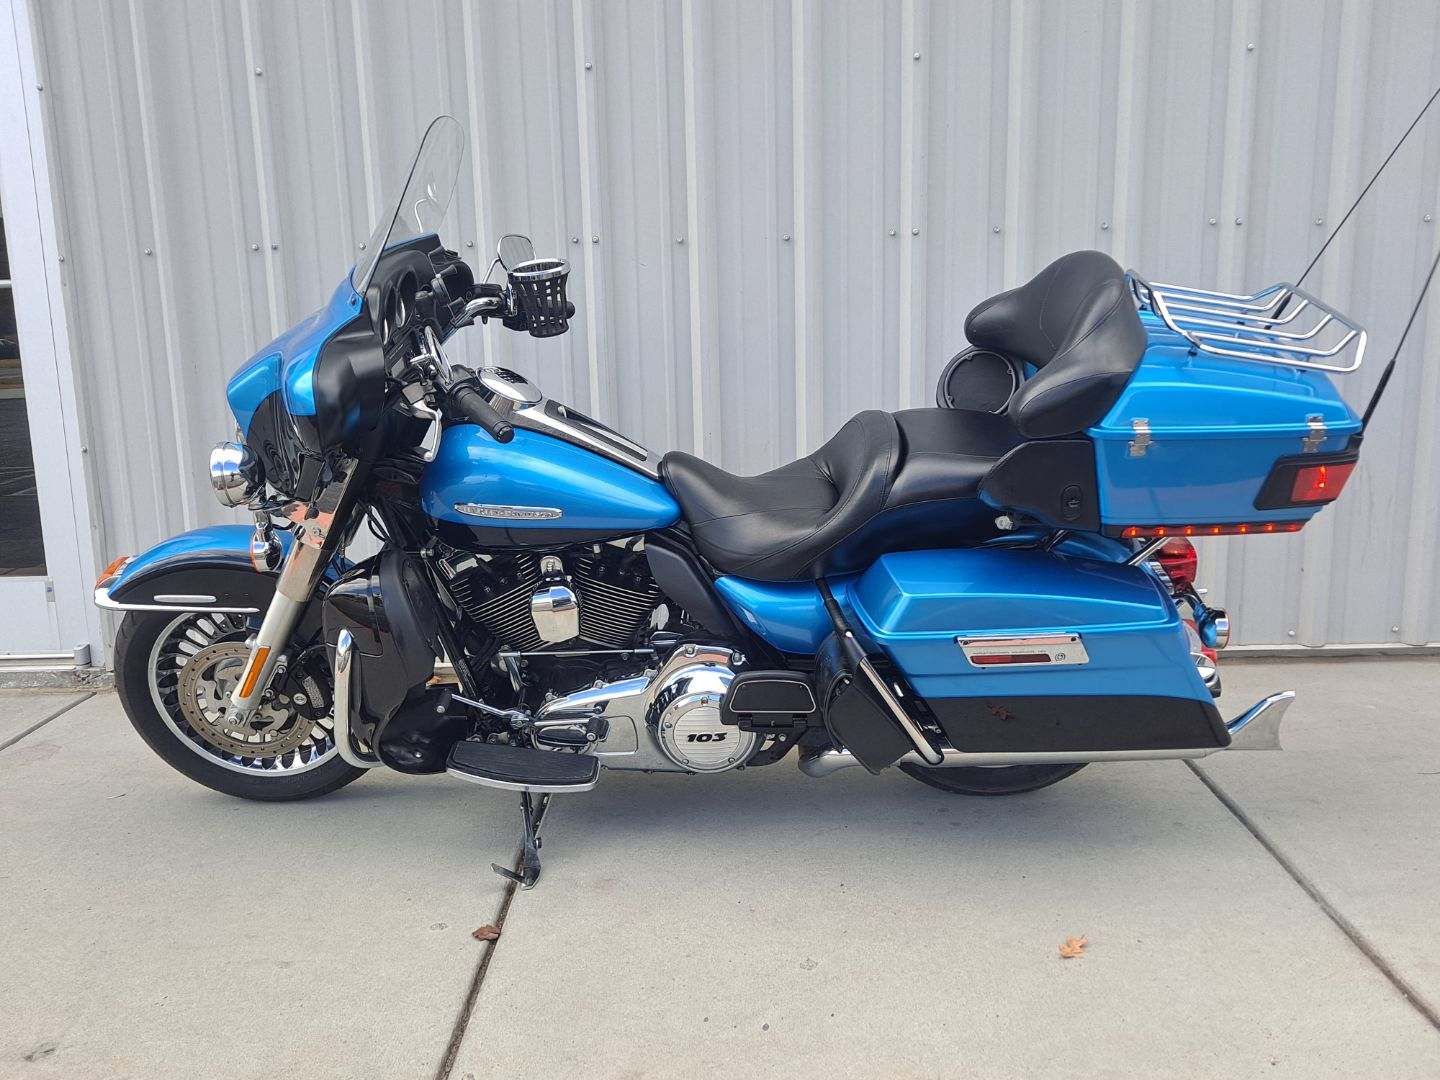 2011 Harley-Davidson Electra Glide® Ultra Limited in Clarksville, Tennessee - Photo 2